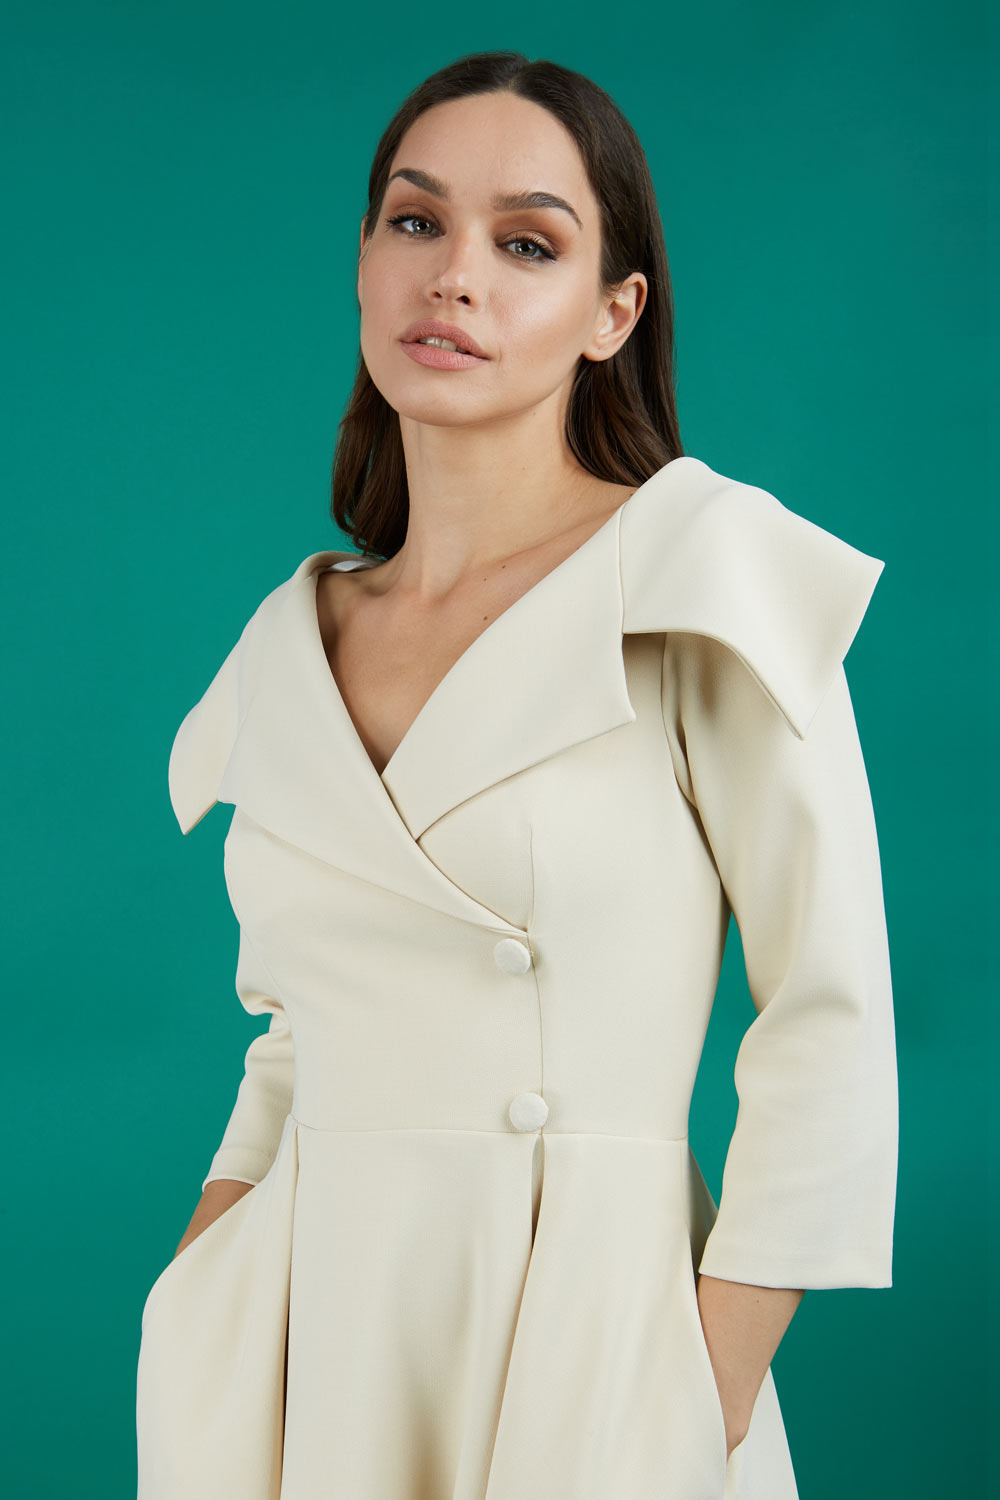 Brunette model is wearing a sleeved beige oversized collar swing dress with button detail at the front and pockets in the skirt